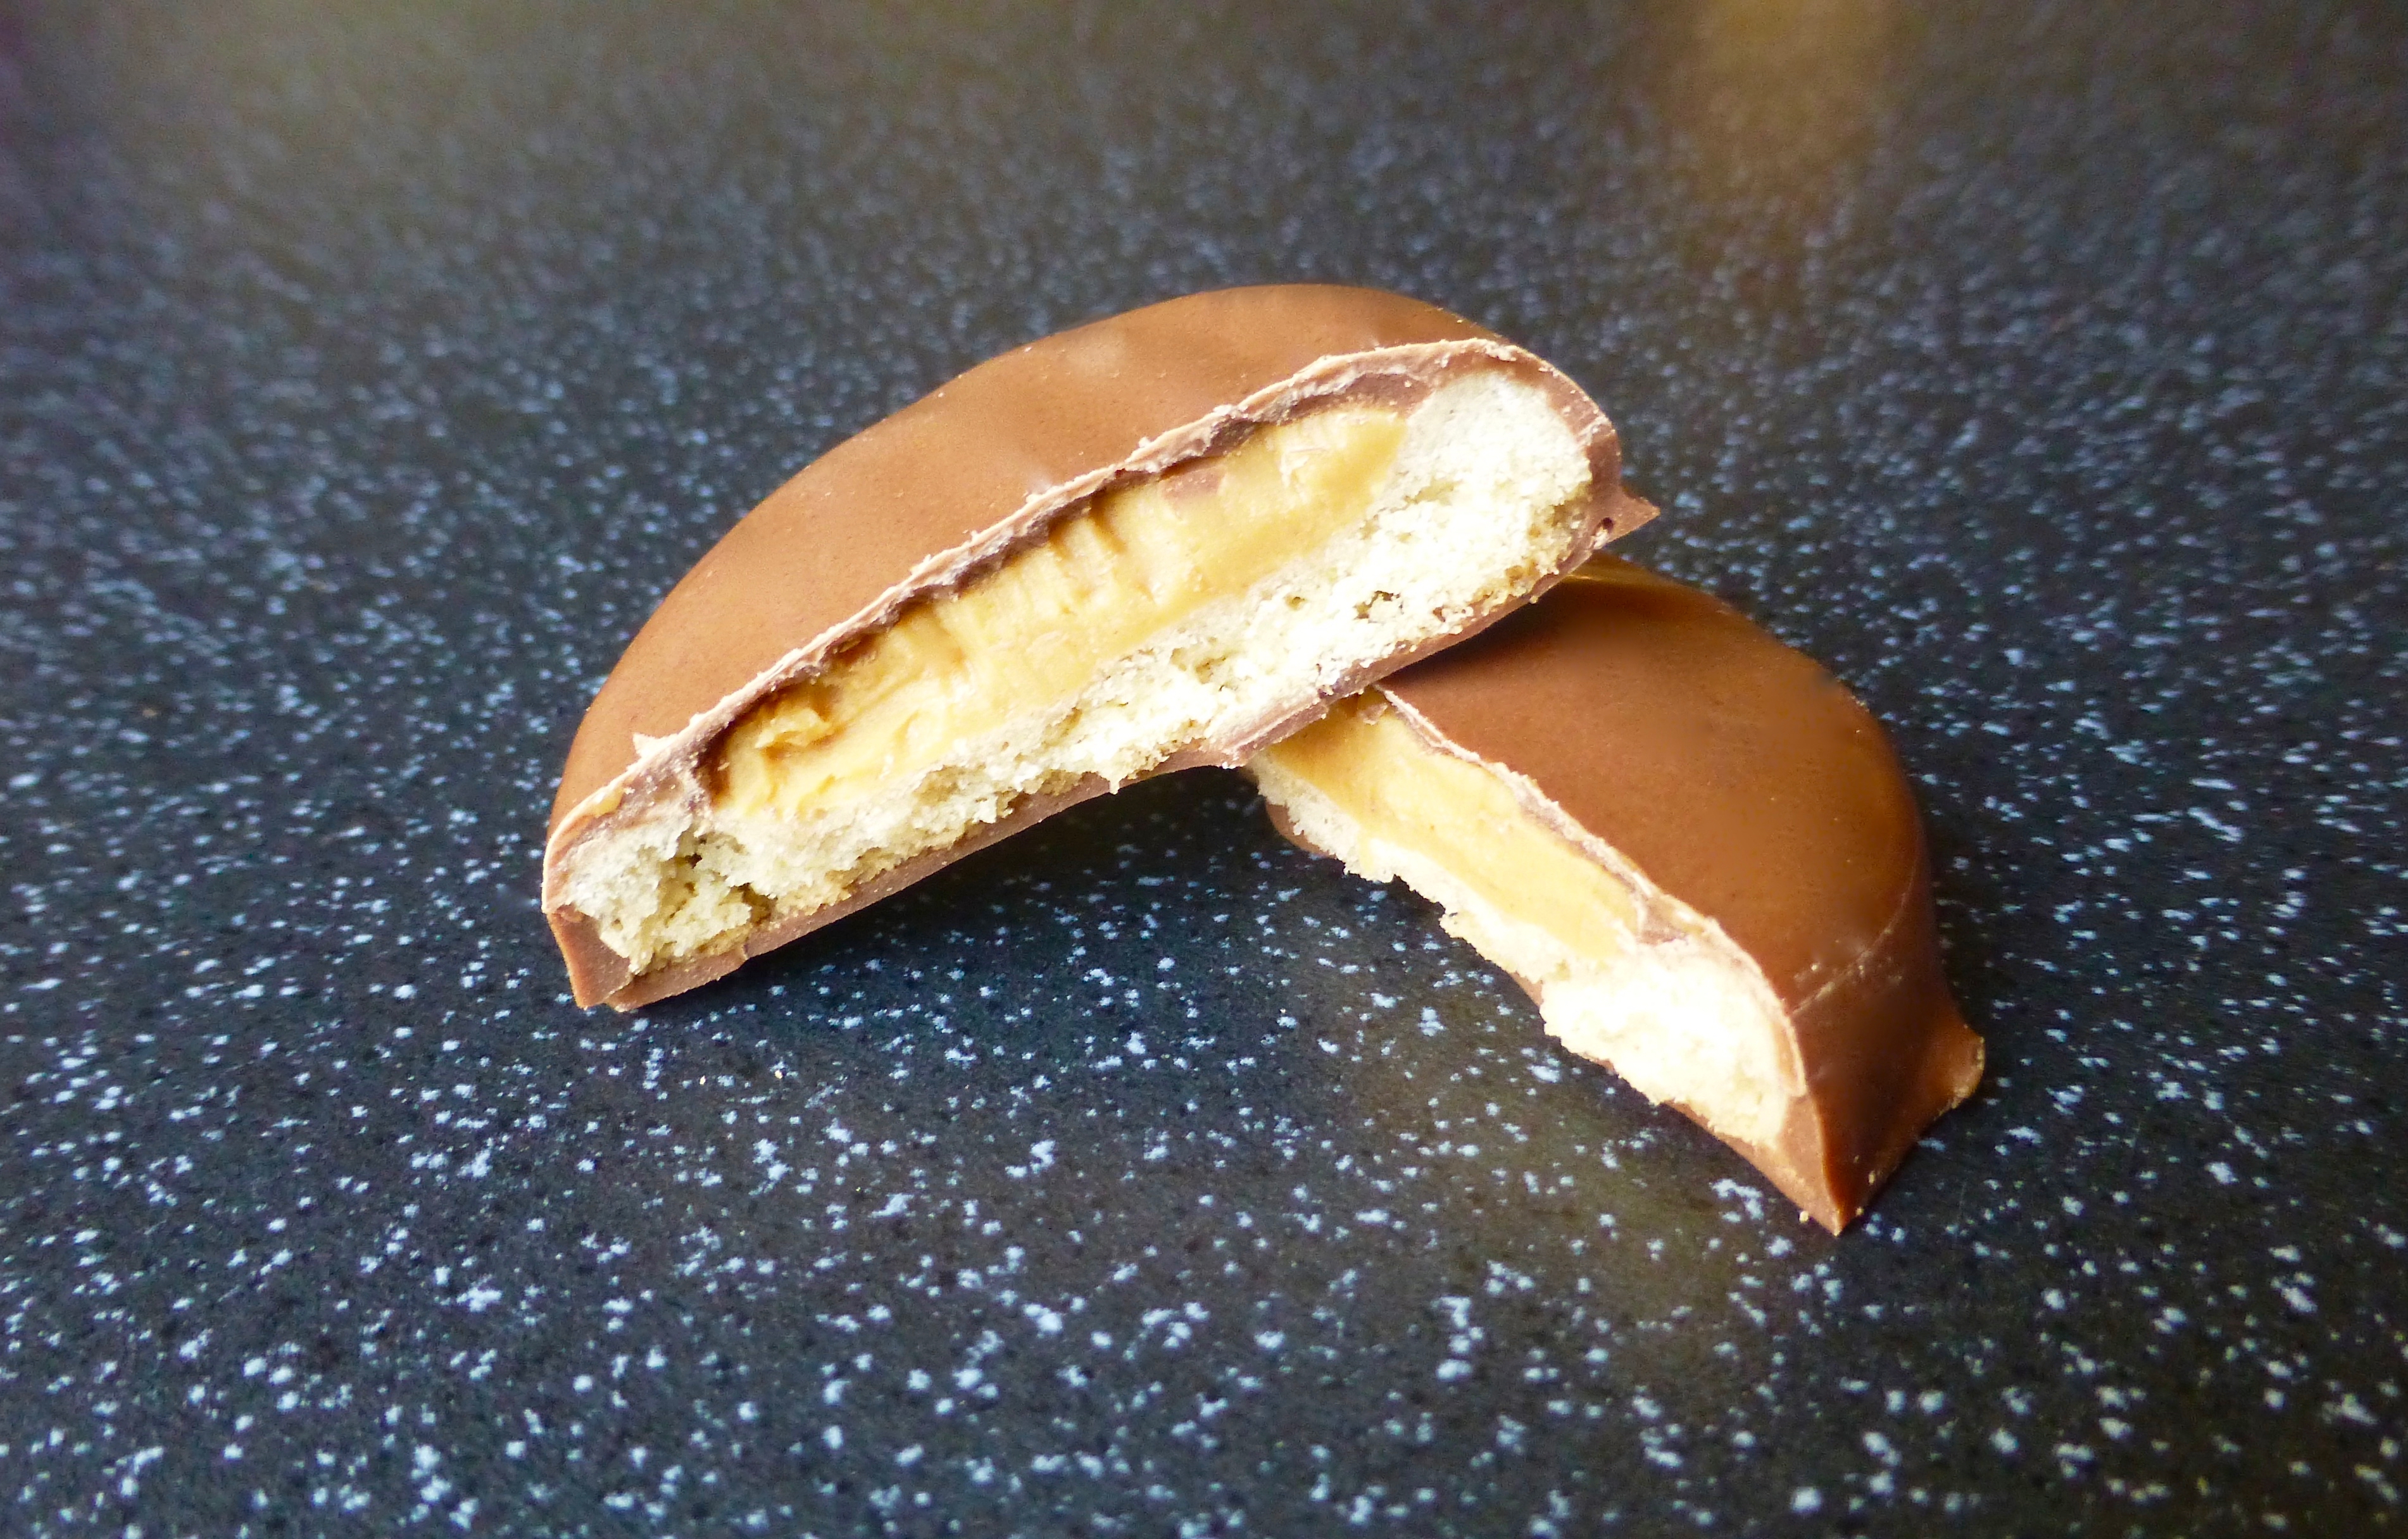 Reese's Rounds